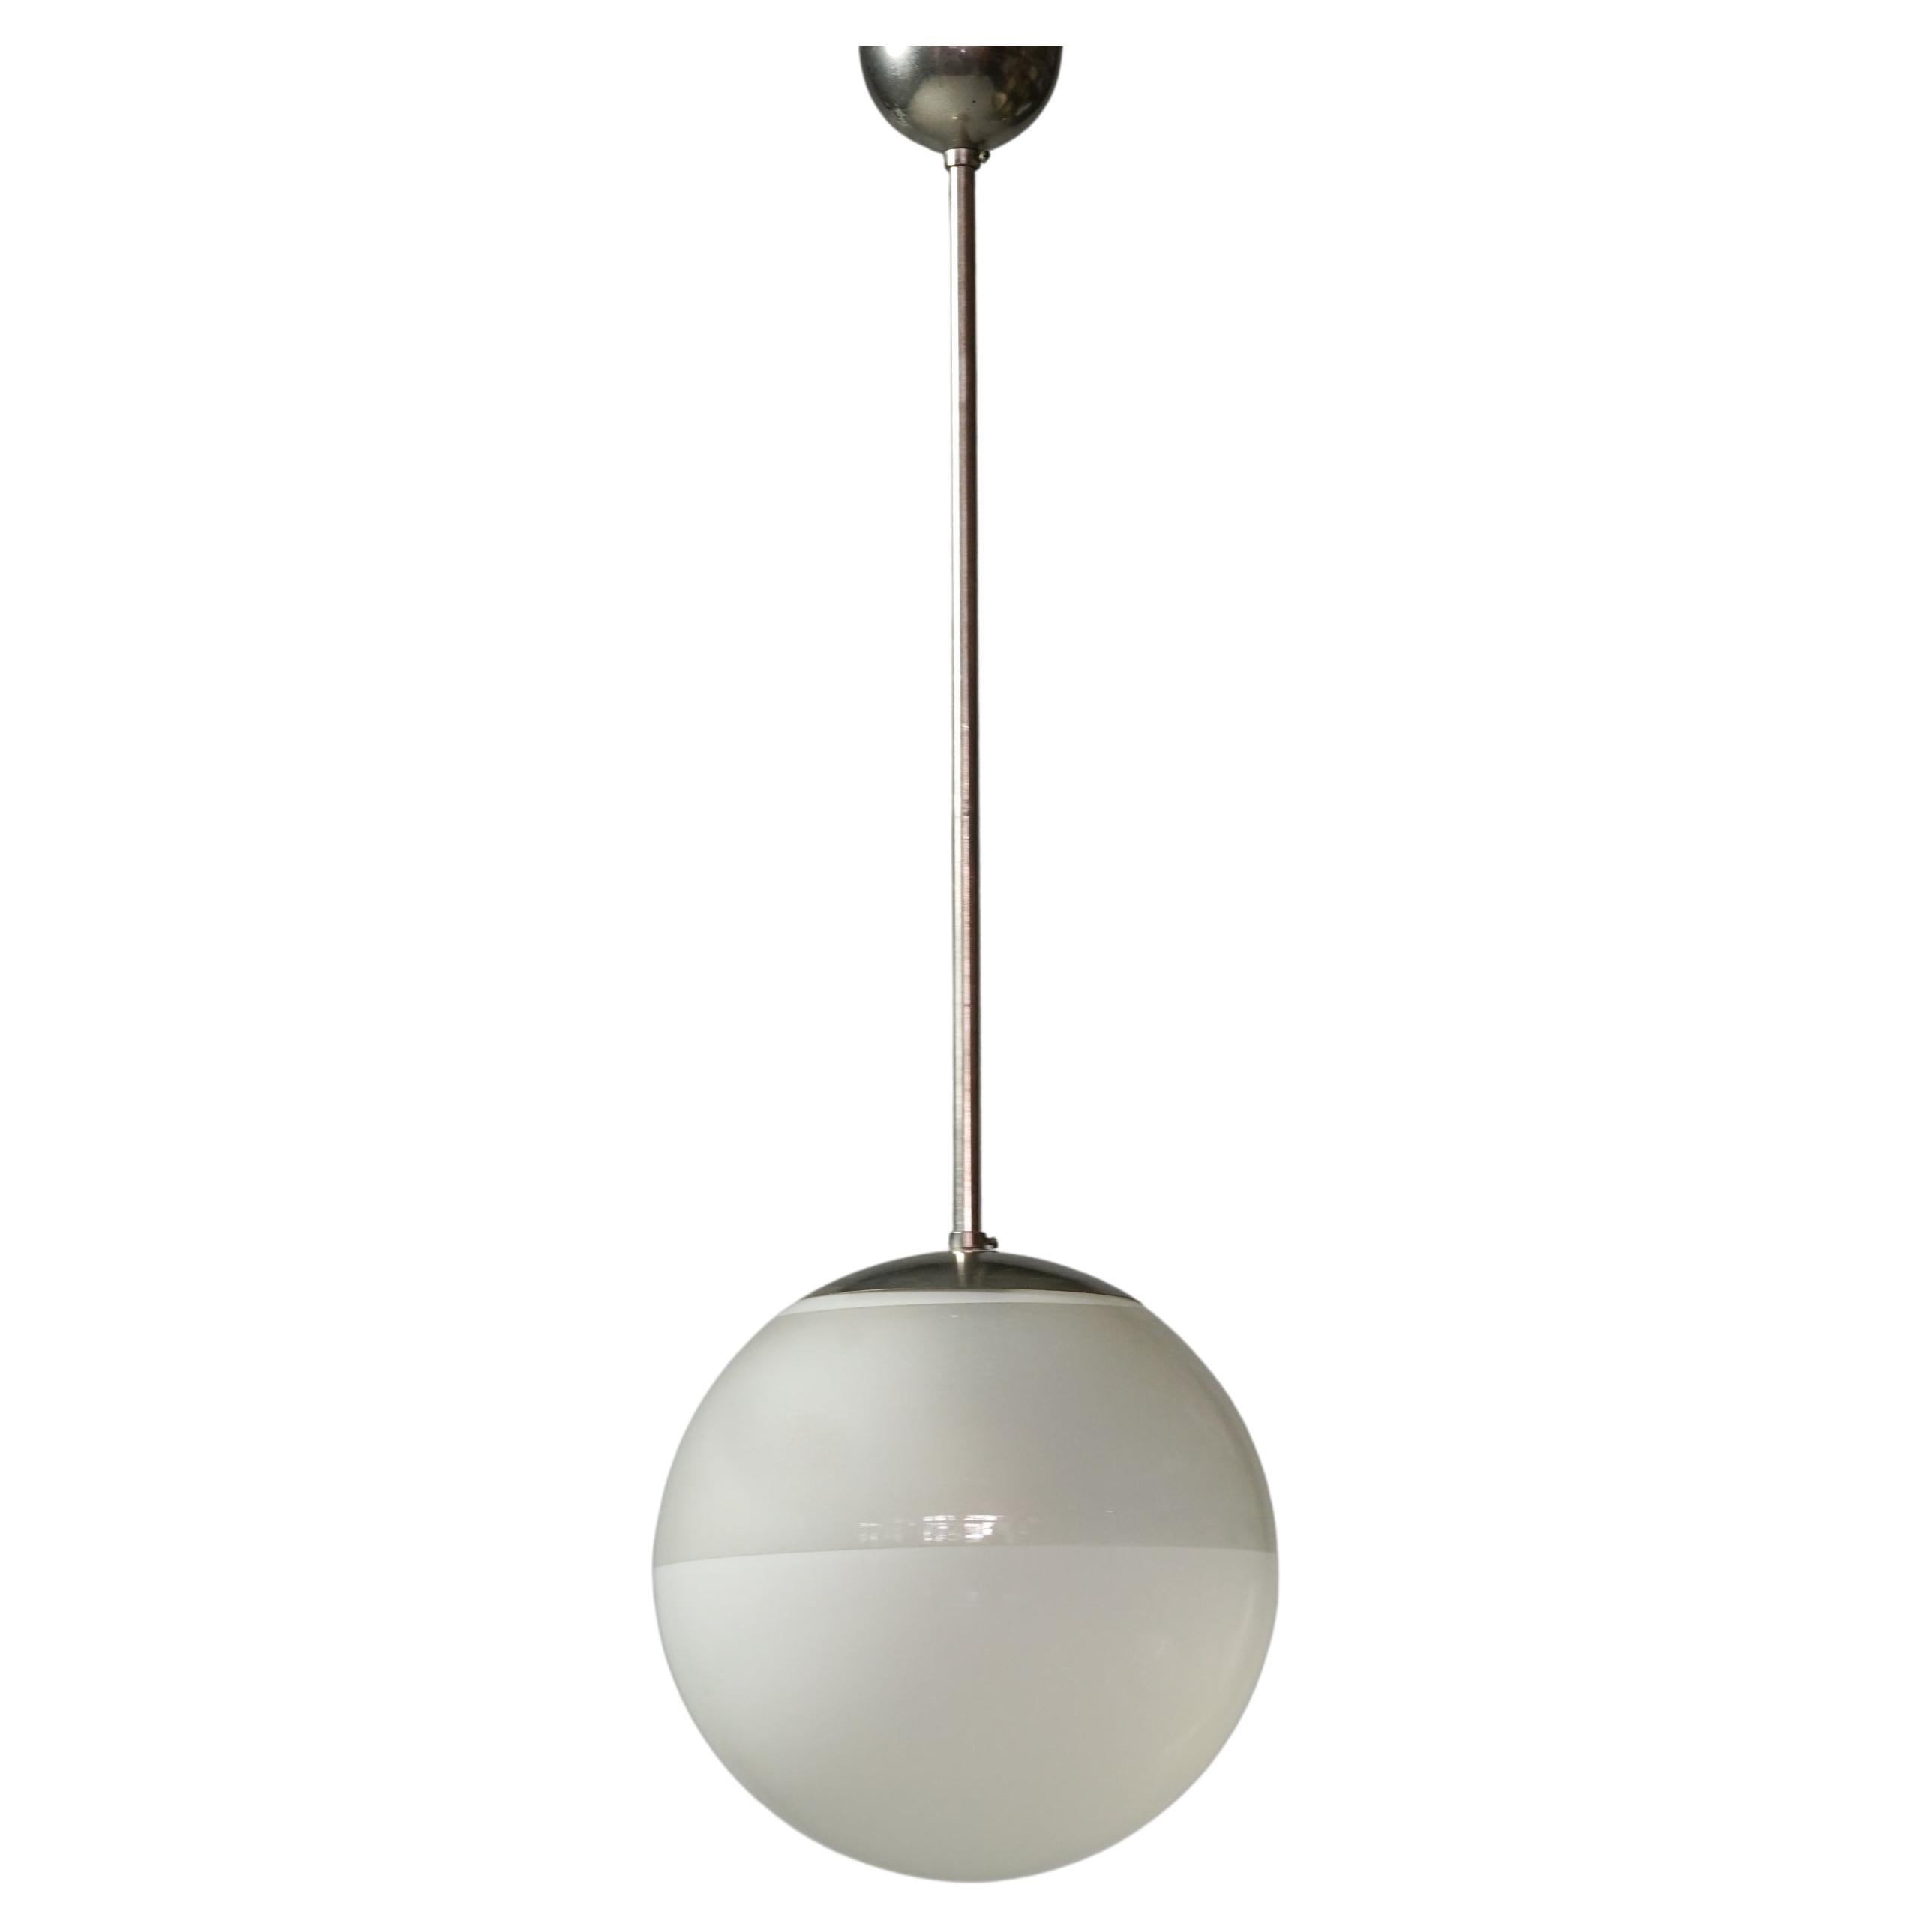 Two colored glass and chromed metal pendant, designed by Paavo Tynell, 1930/1940s. Good vintage condition, minor patina consistent with age and use. Beautiful minimalistic Scandinavian Modern design. 

Paavo Tynell (1890-1973) is one of the most